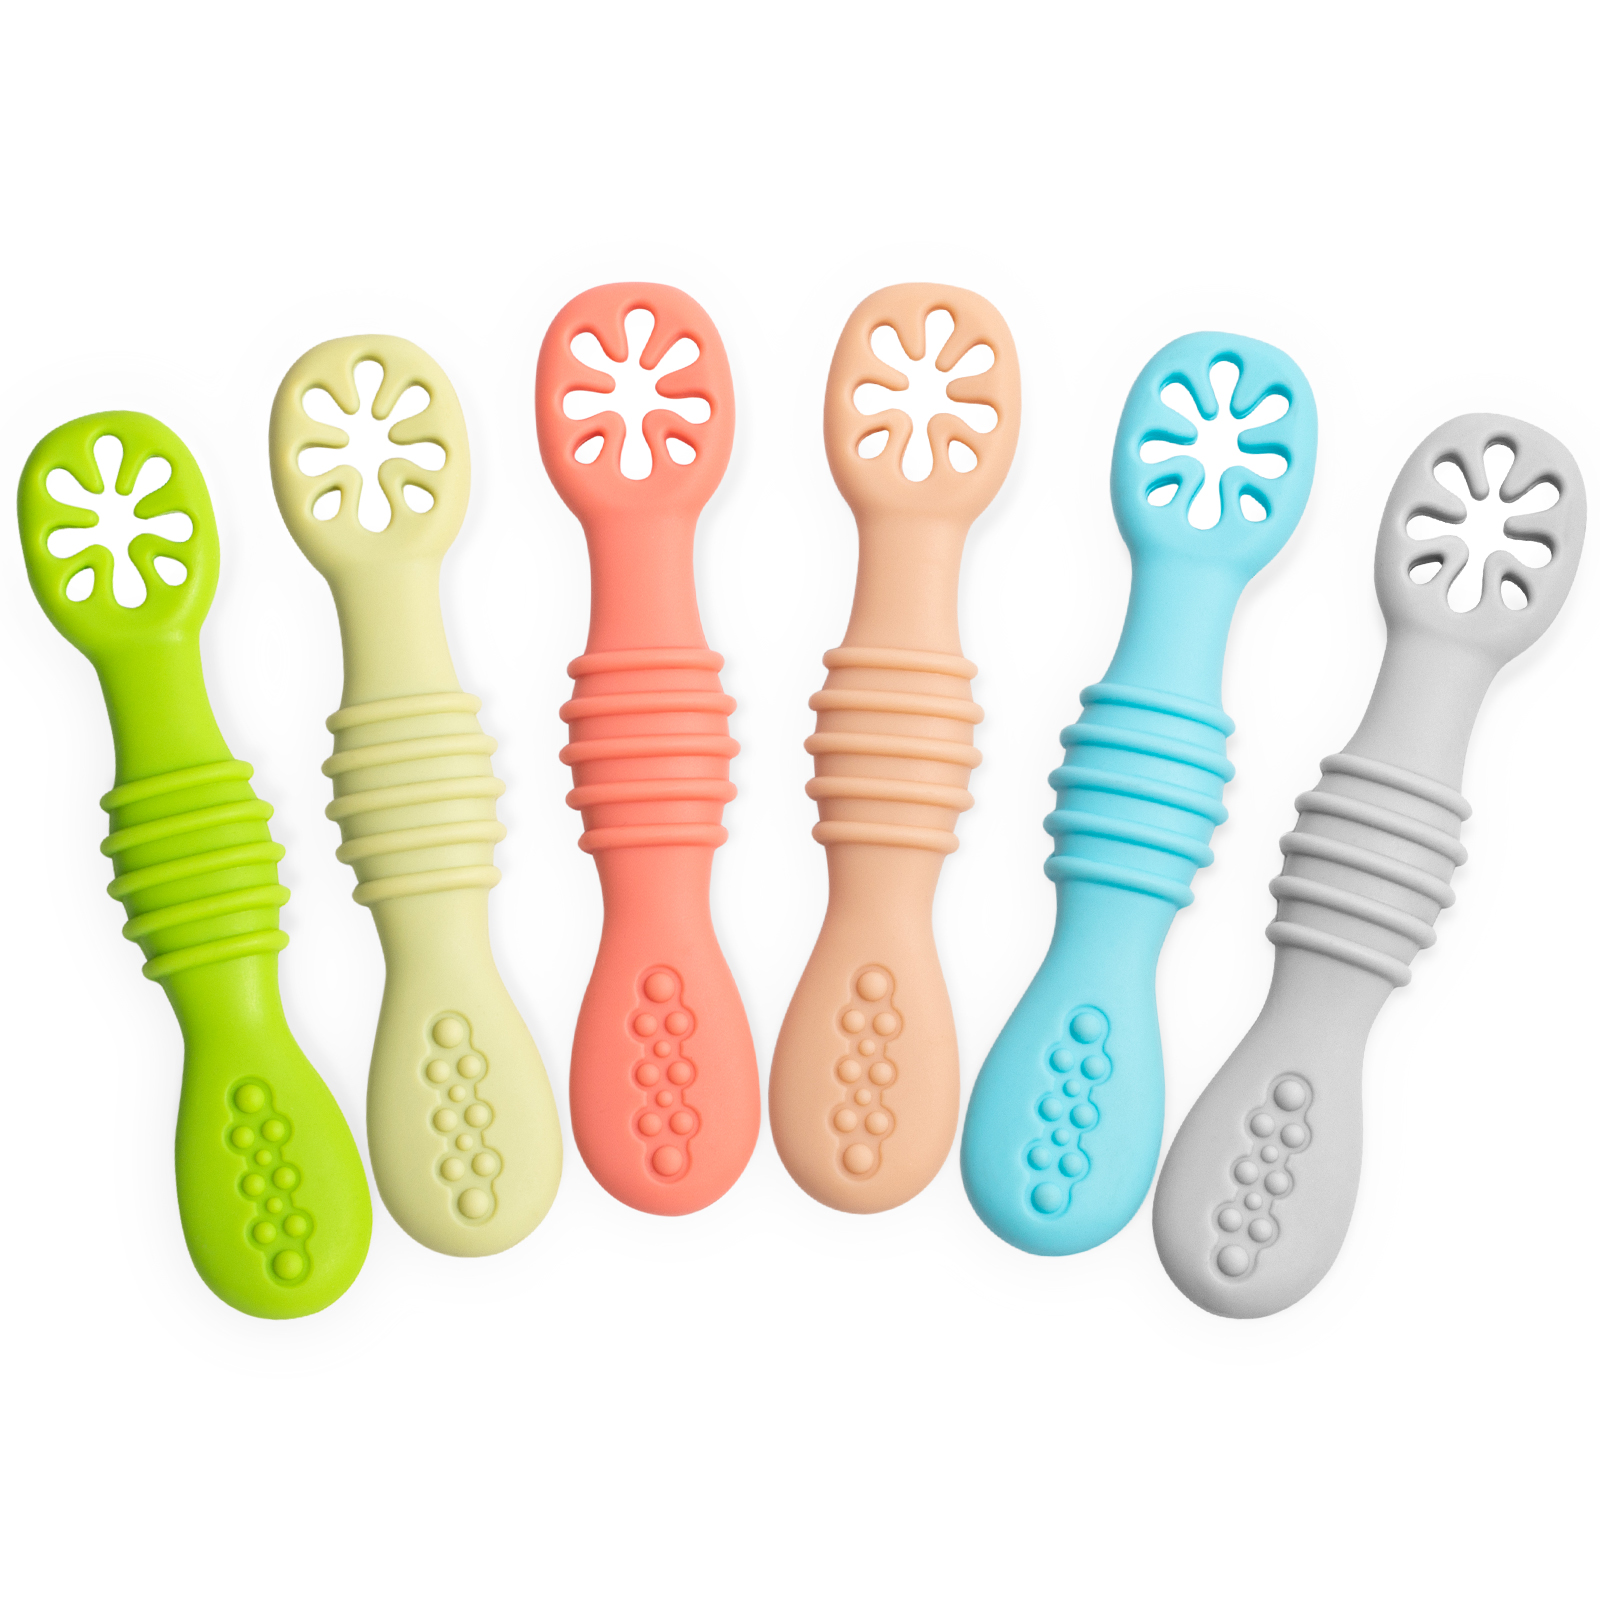  WeeSprout Baby Spoons for Self Feeding 6 Months +, Soft &  Durable Silicone Baby Utensils for Sensitive Gums & Teeth, Easy Grip  Handles for Little Hands, Set of 3 Silicone Baby